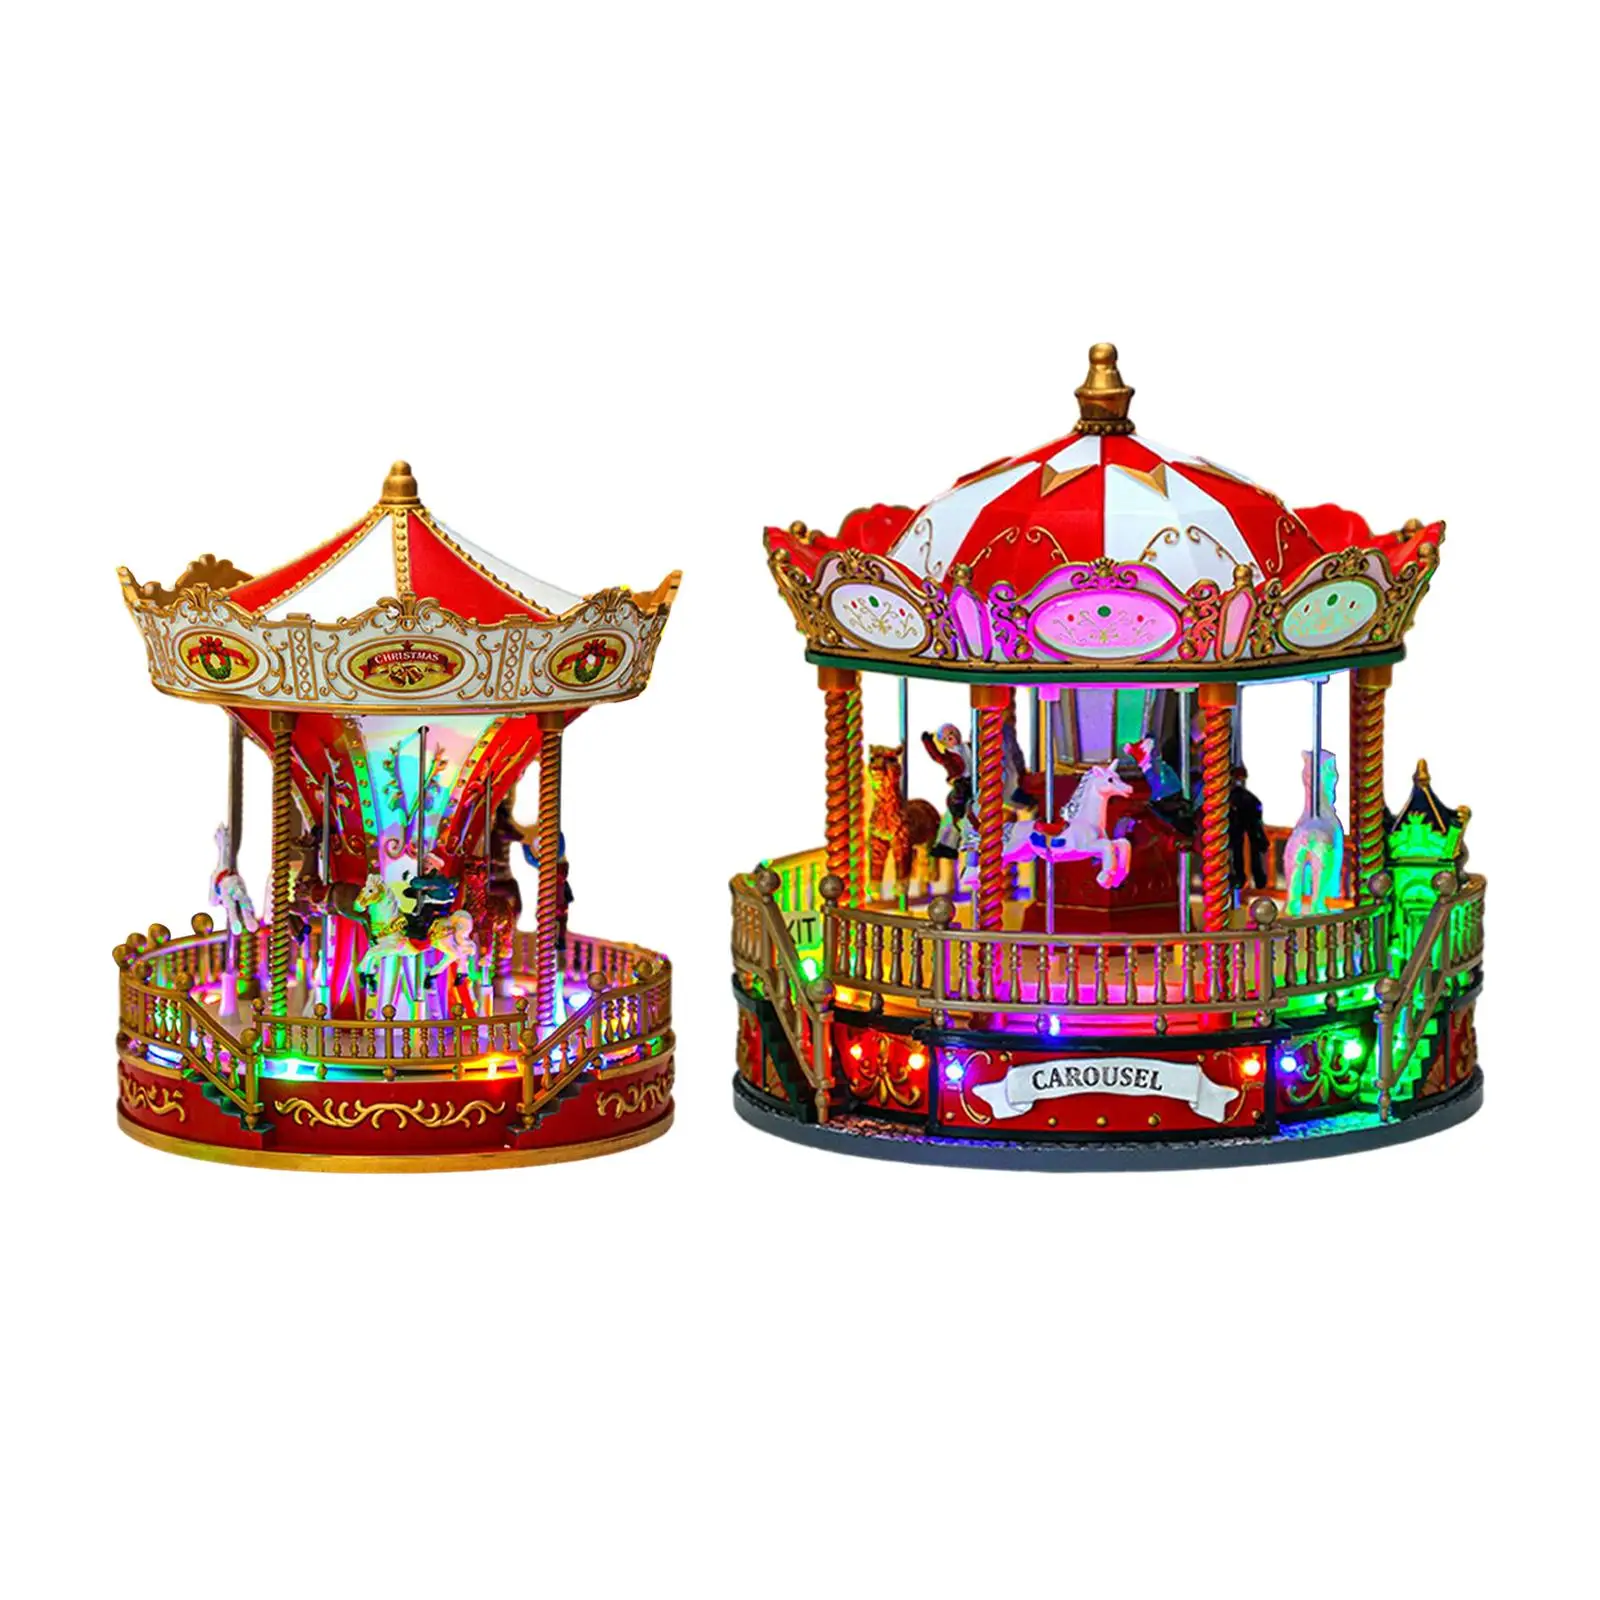 Christmas Carousel Music Box Musical Box with Music and Light Christmas Ornament for Festival Office Xmas Desk Decoration